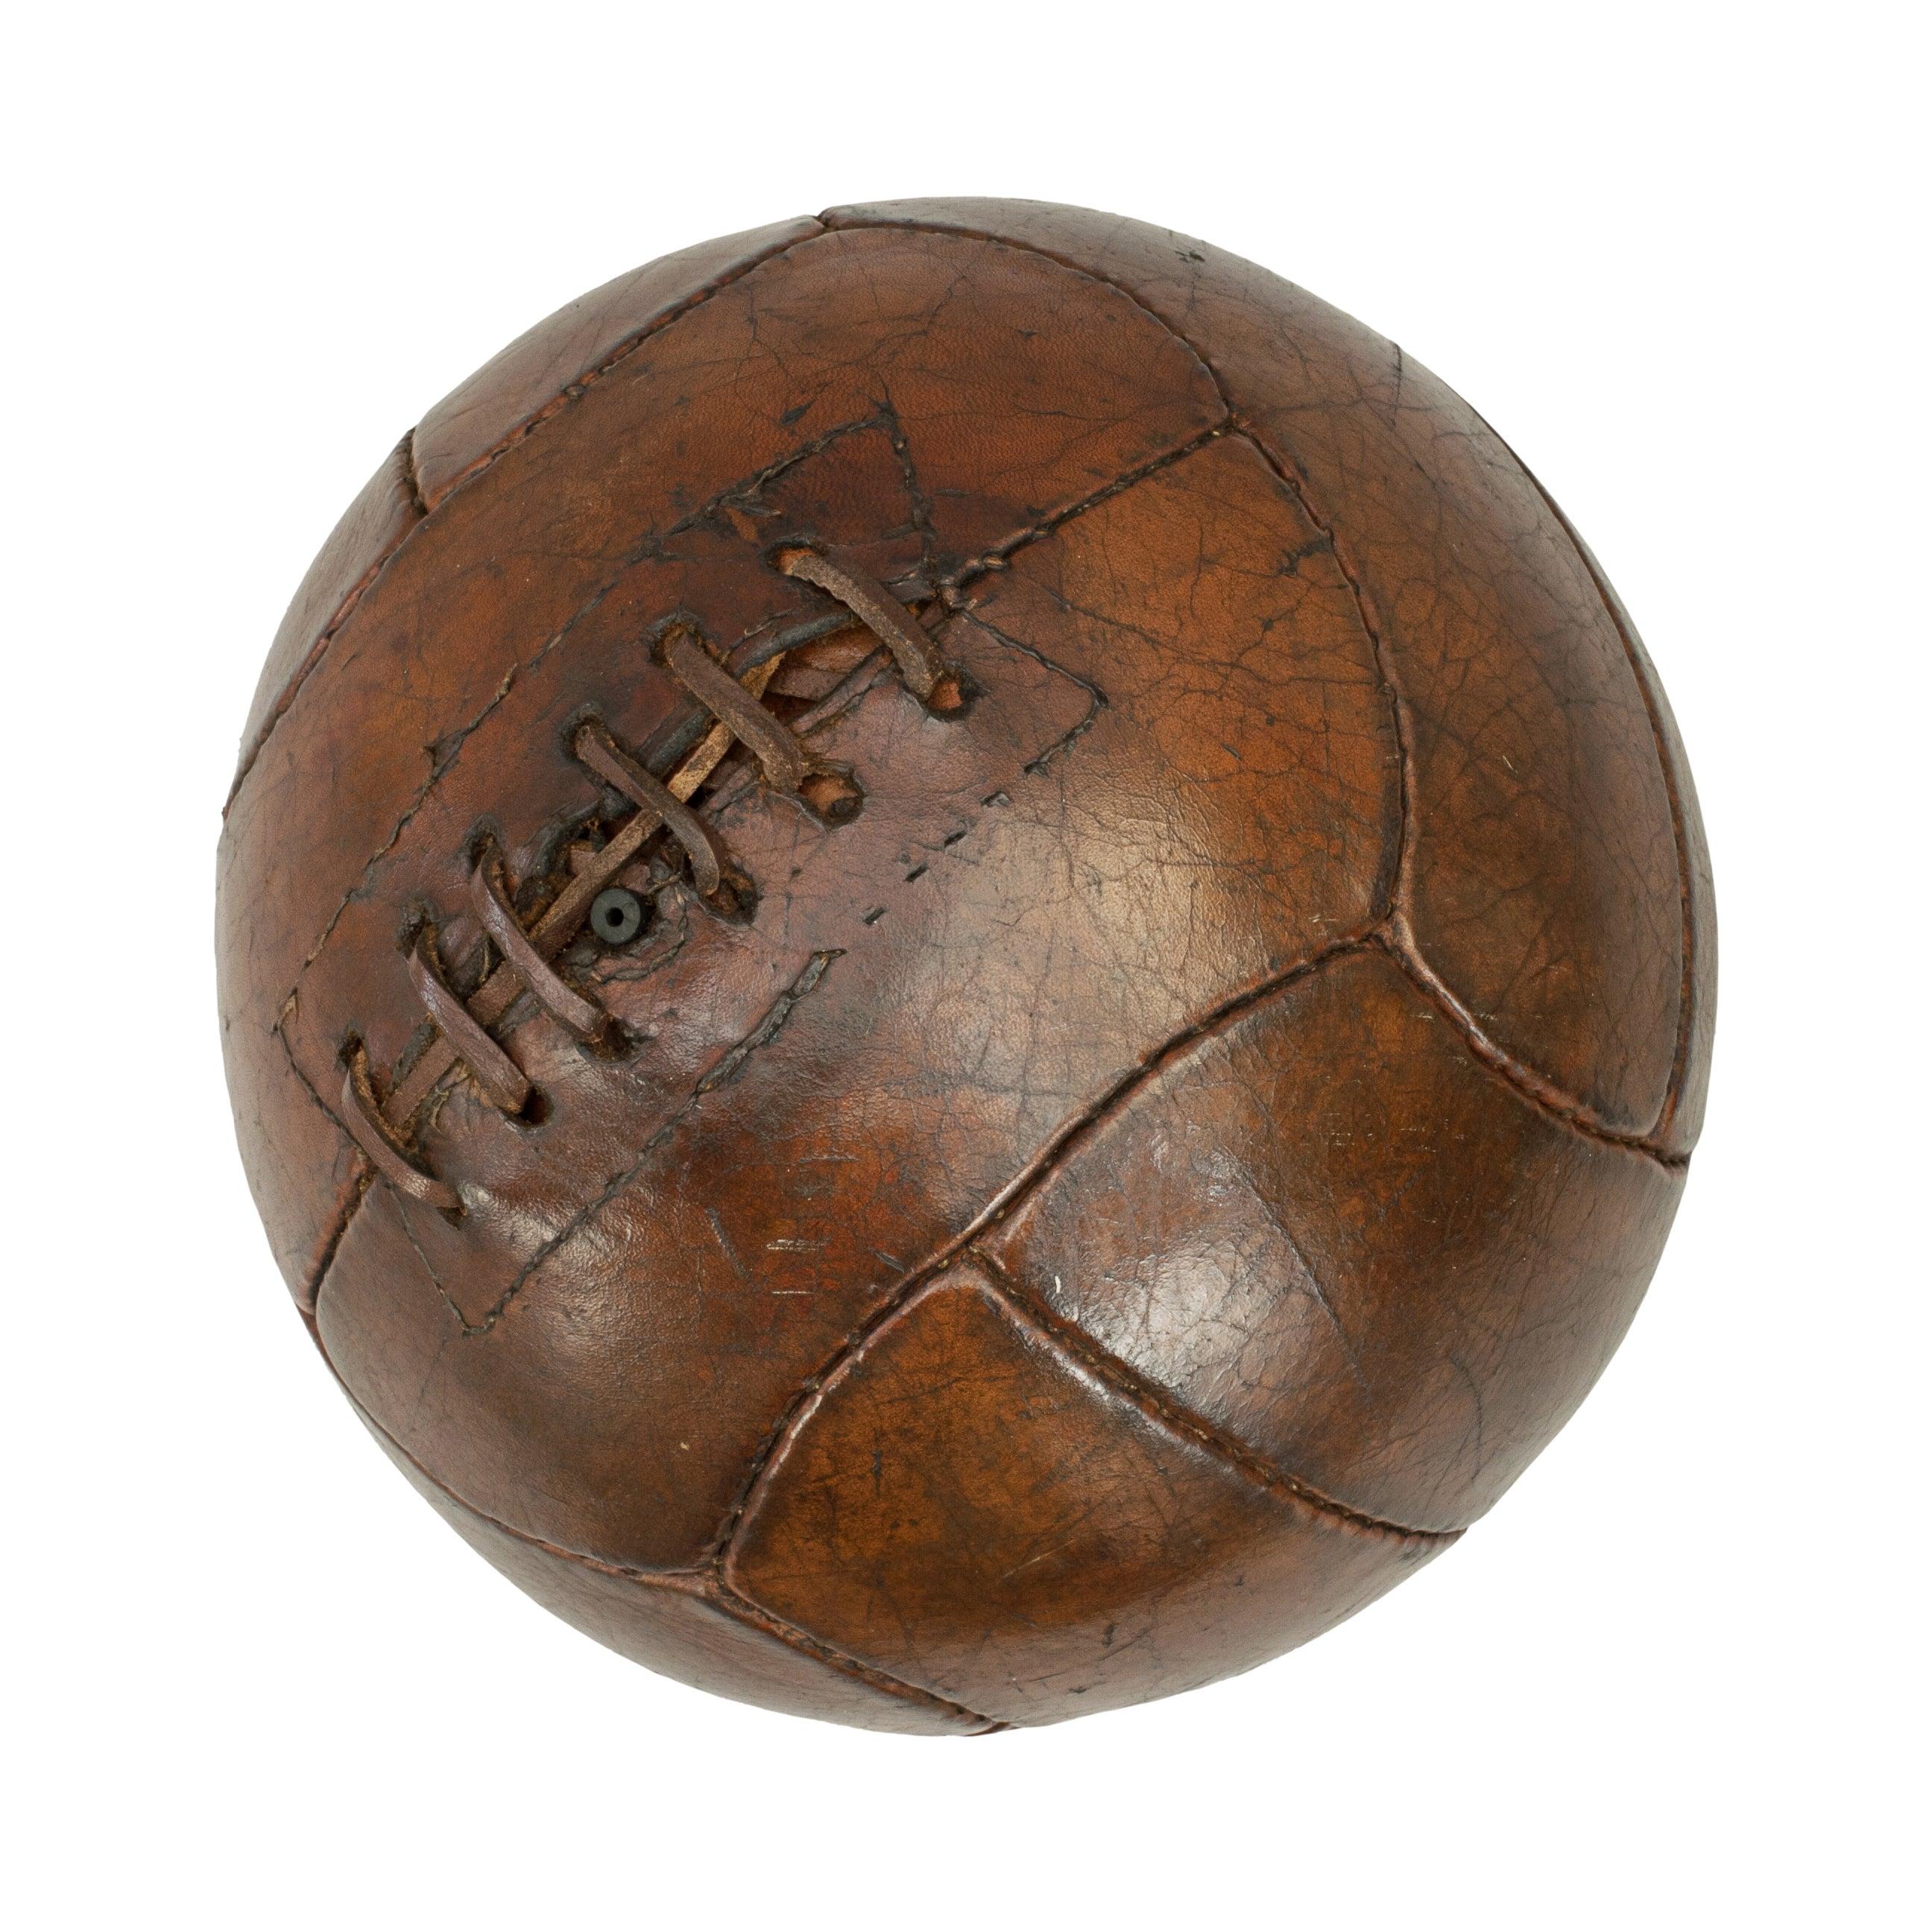 Vintage 1940s Leather Football, Soccer Ball